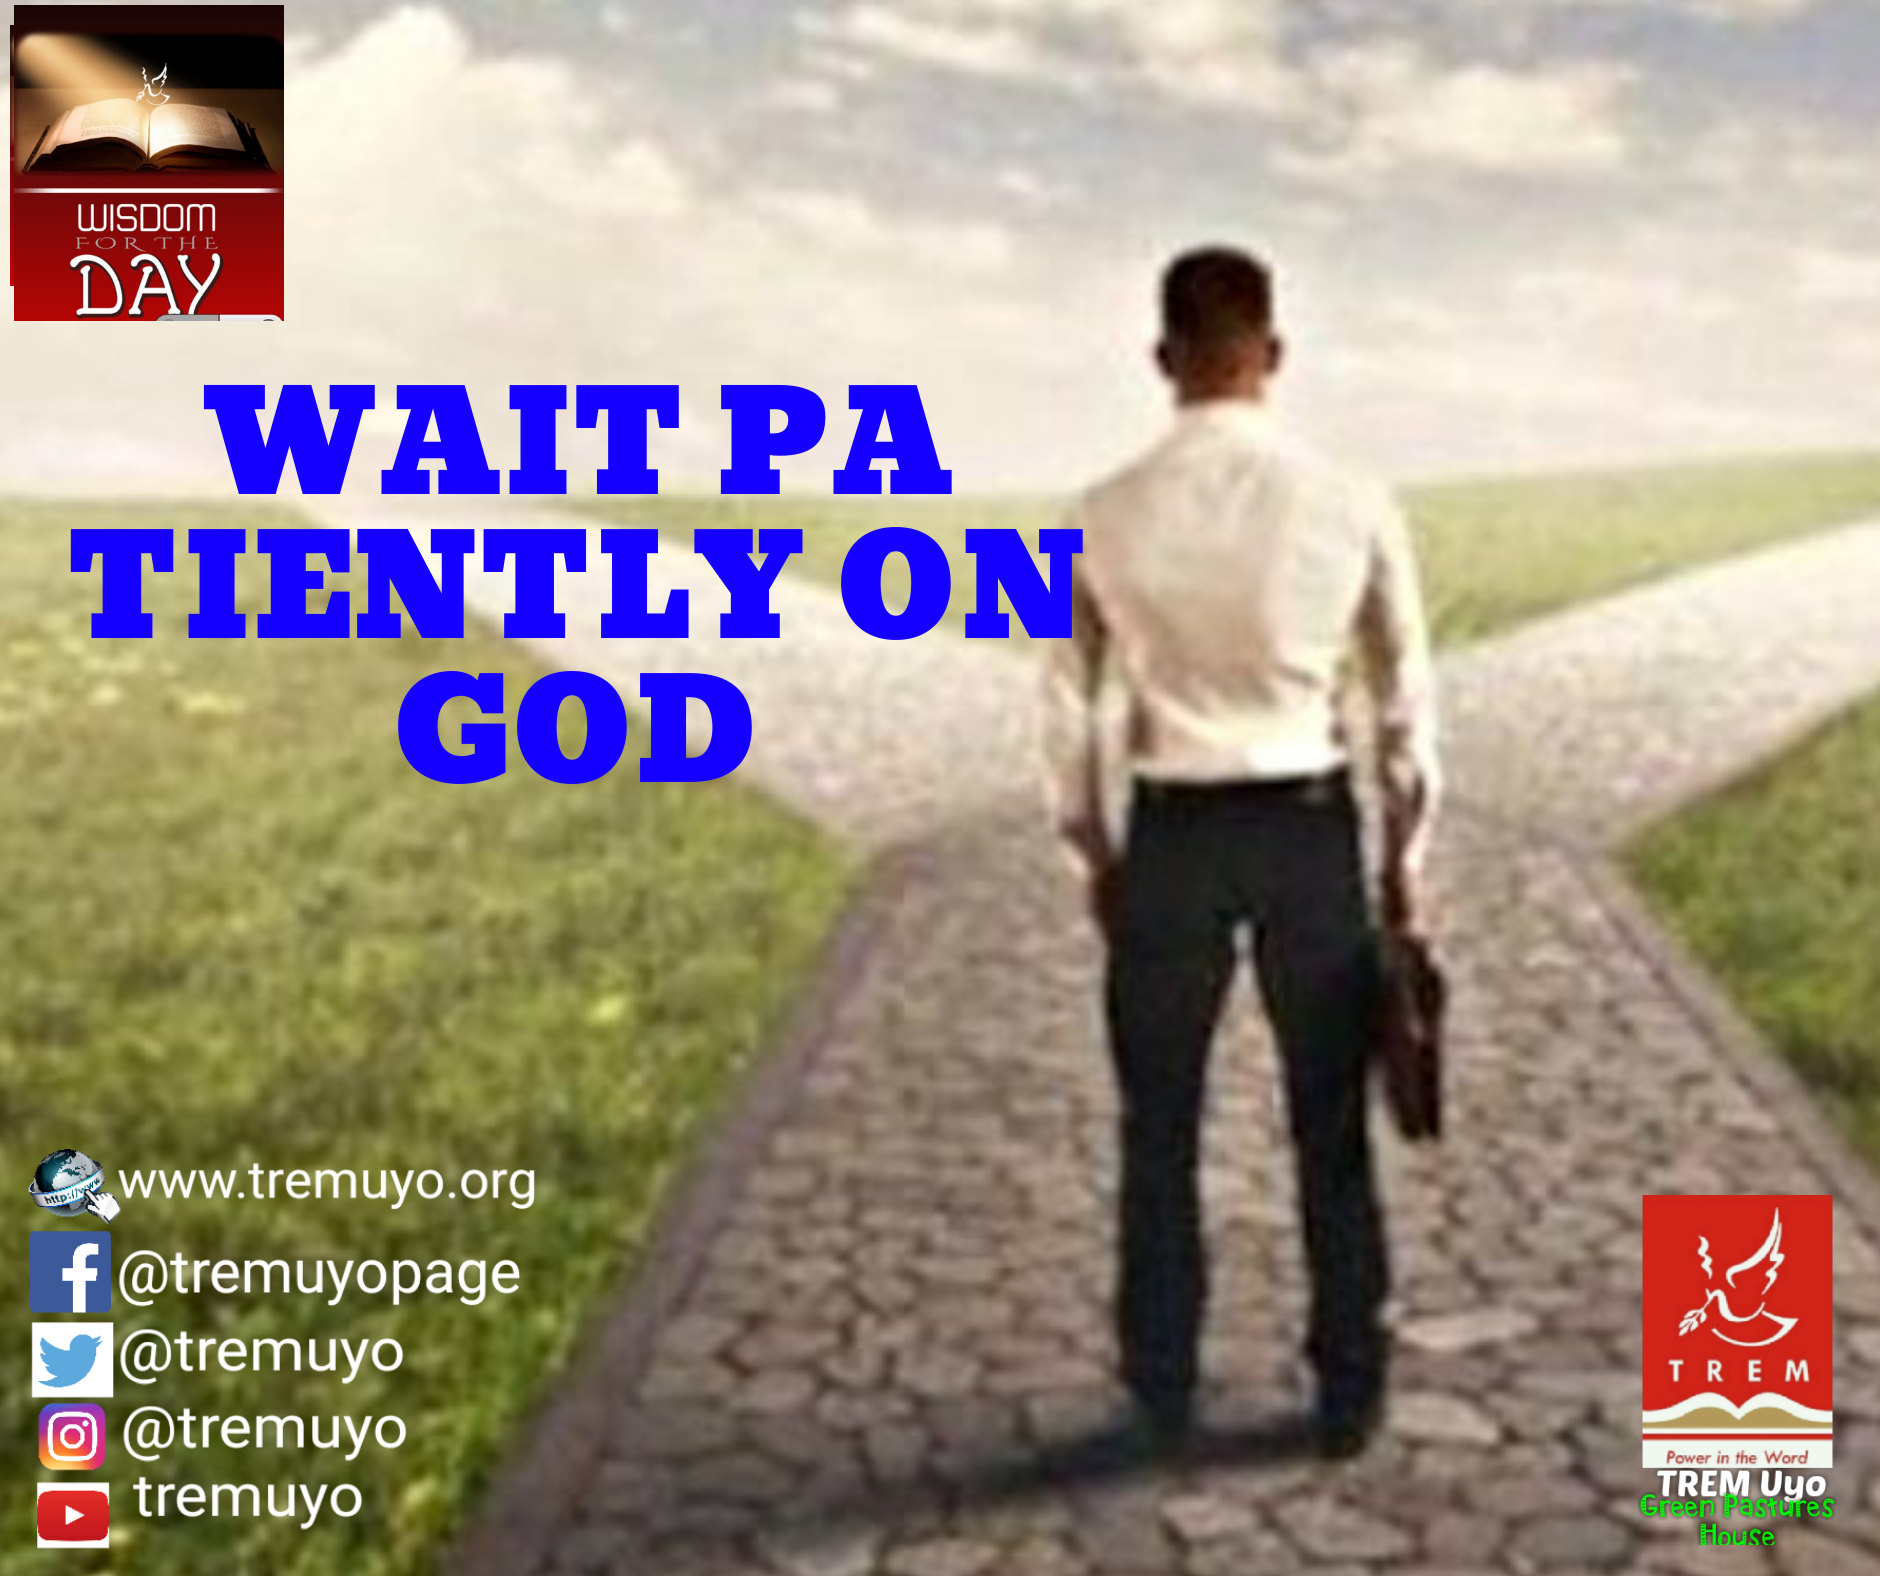 WAIT PATIENTLY ON GOD